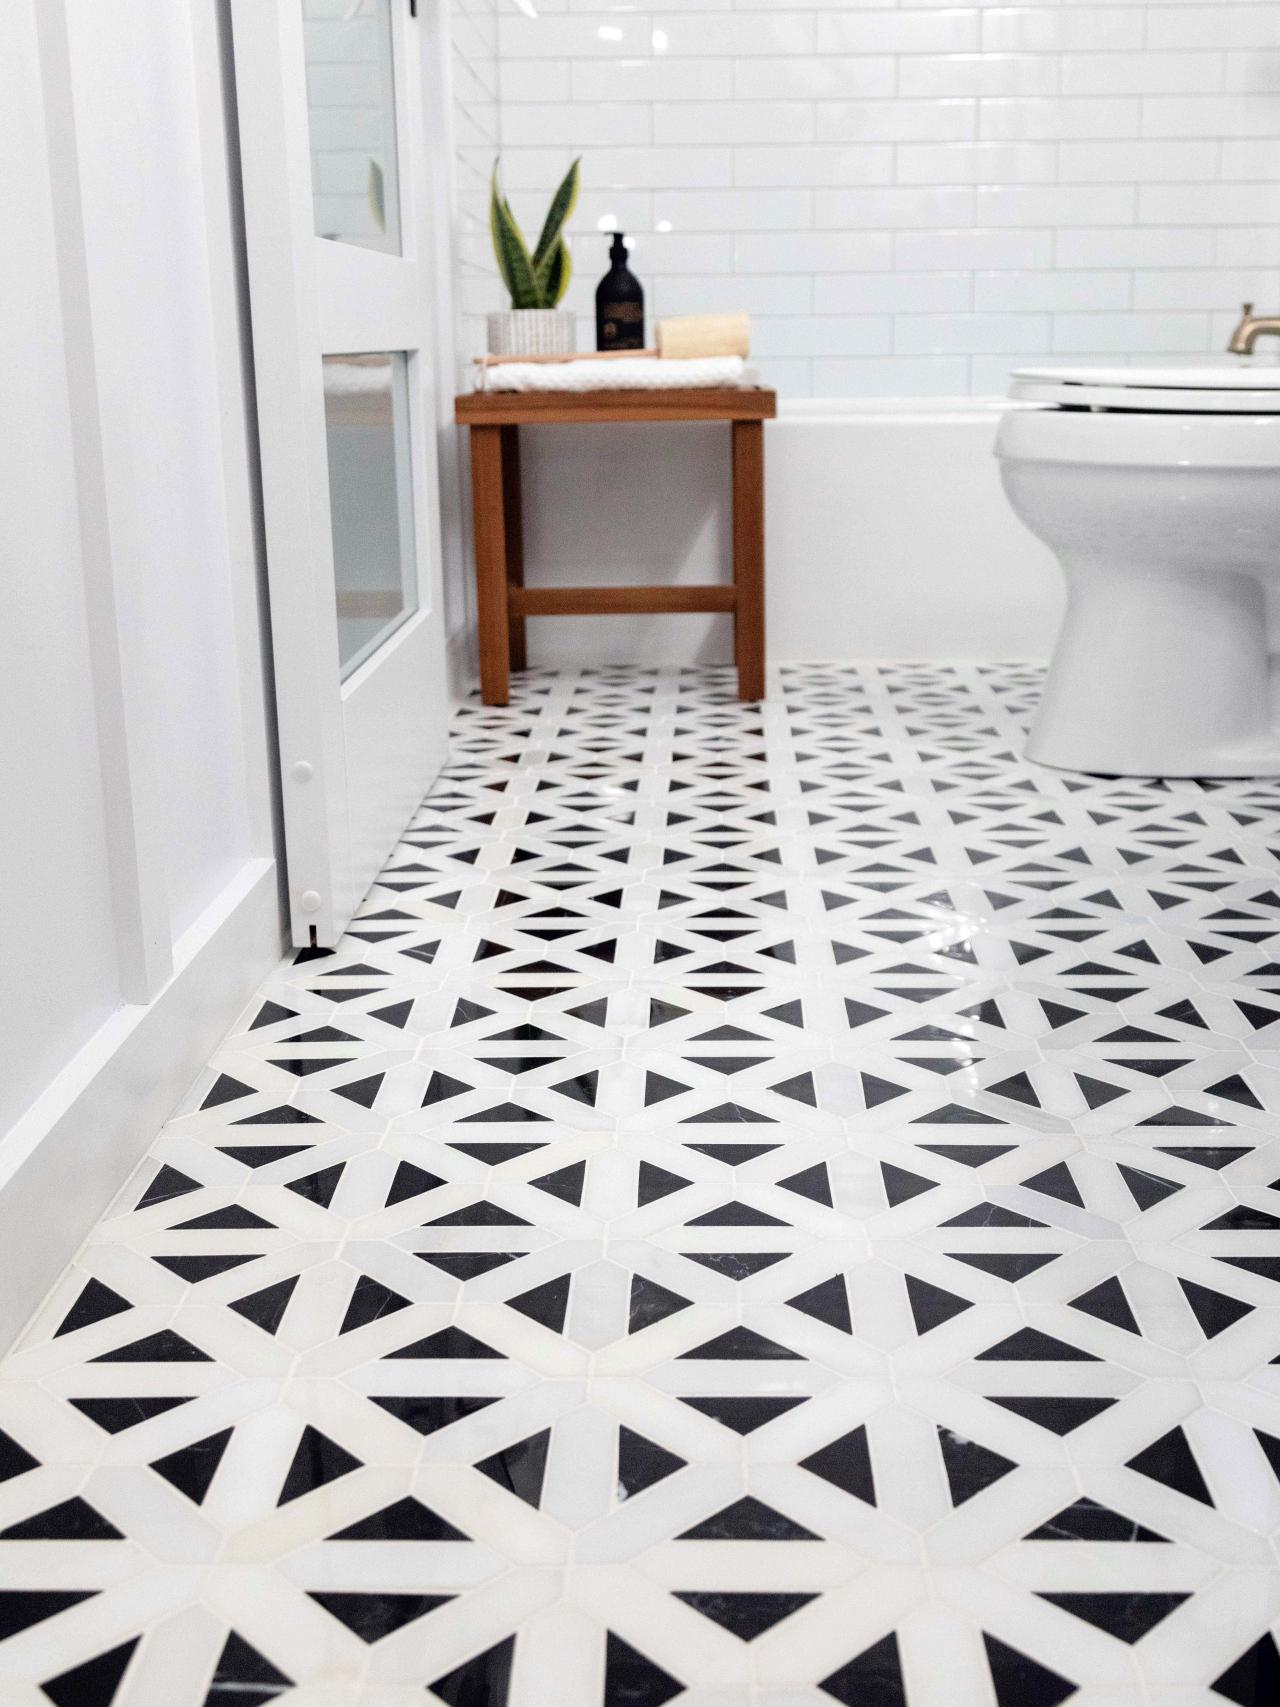 How To Lay A Tile Floor, How To Lay Tile In Bathroom